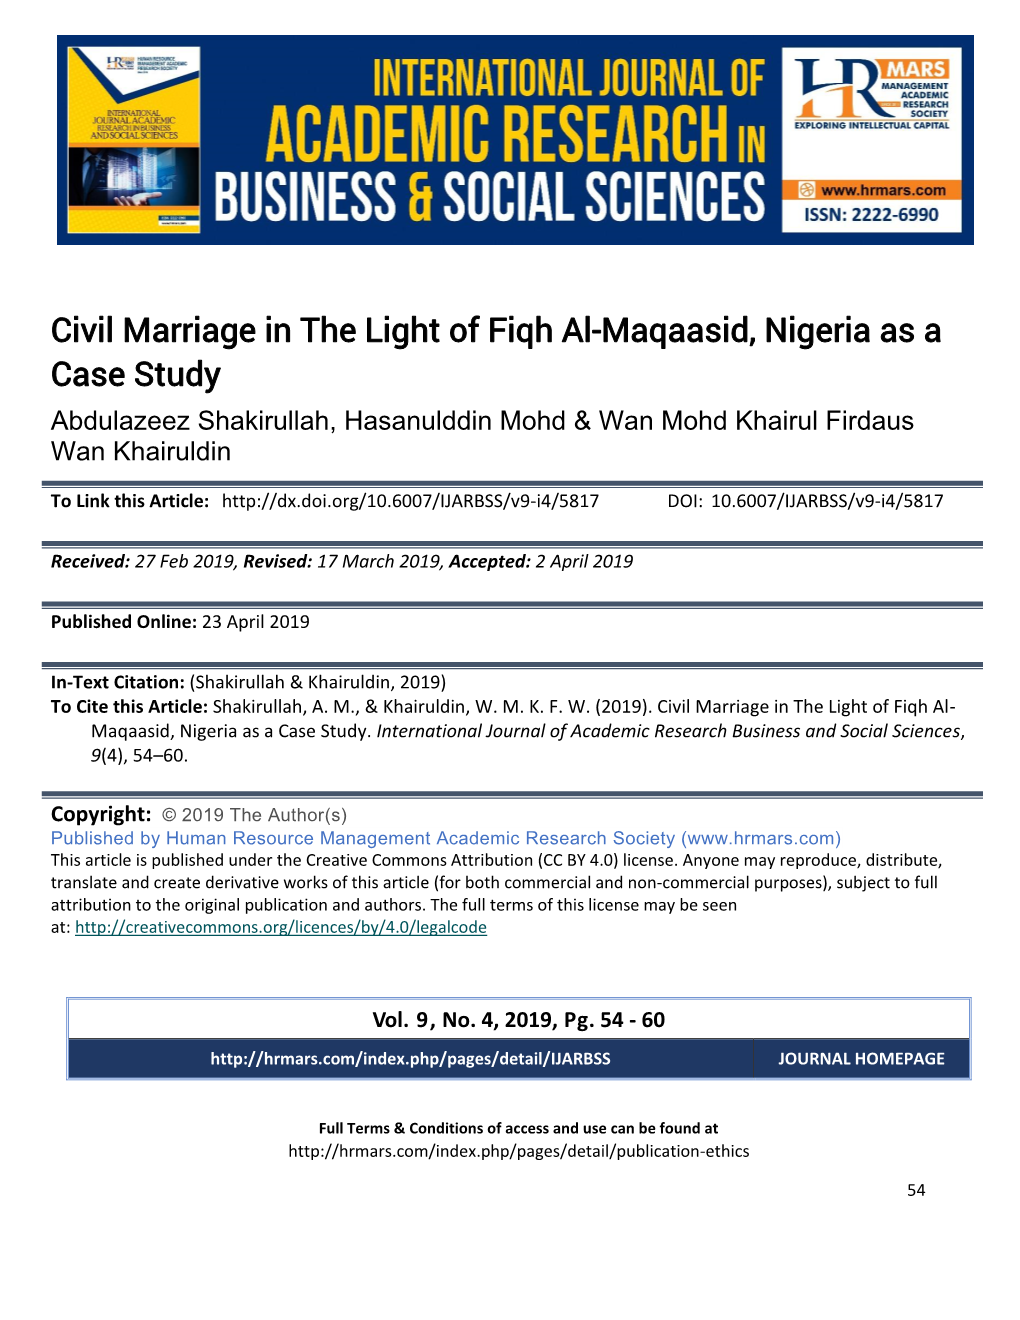 Civil Marriage in the Light of Fiqh Al-Maqaasid, Nigeria As a Case Study